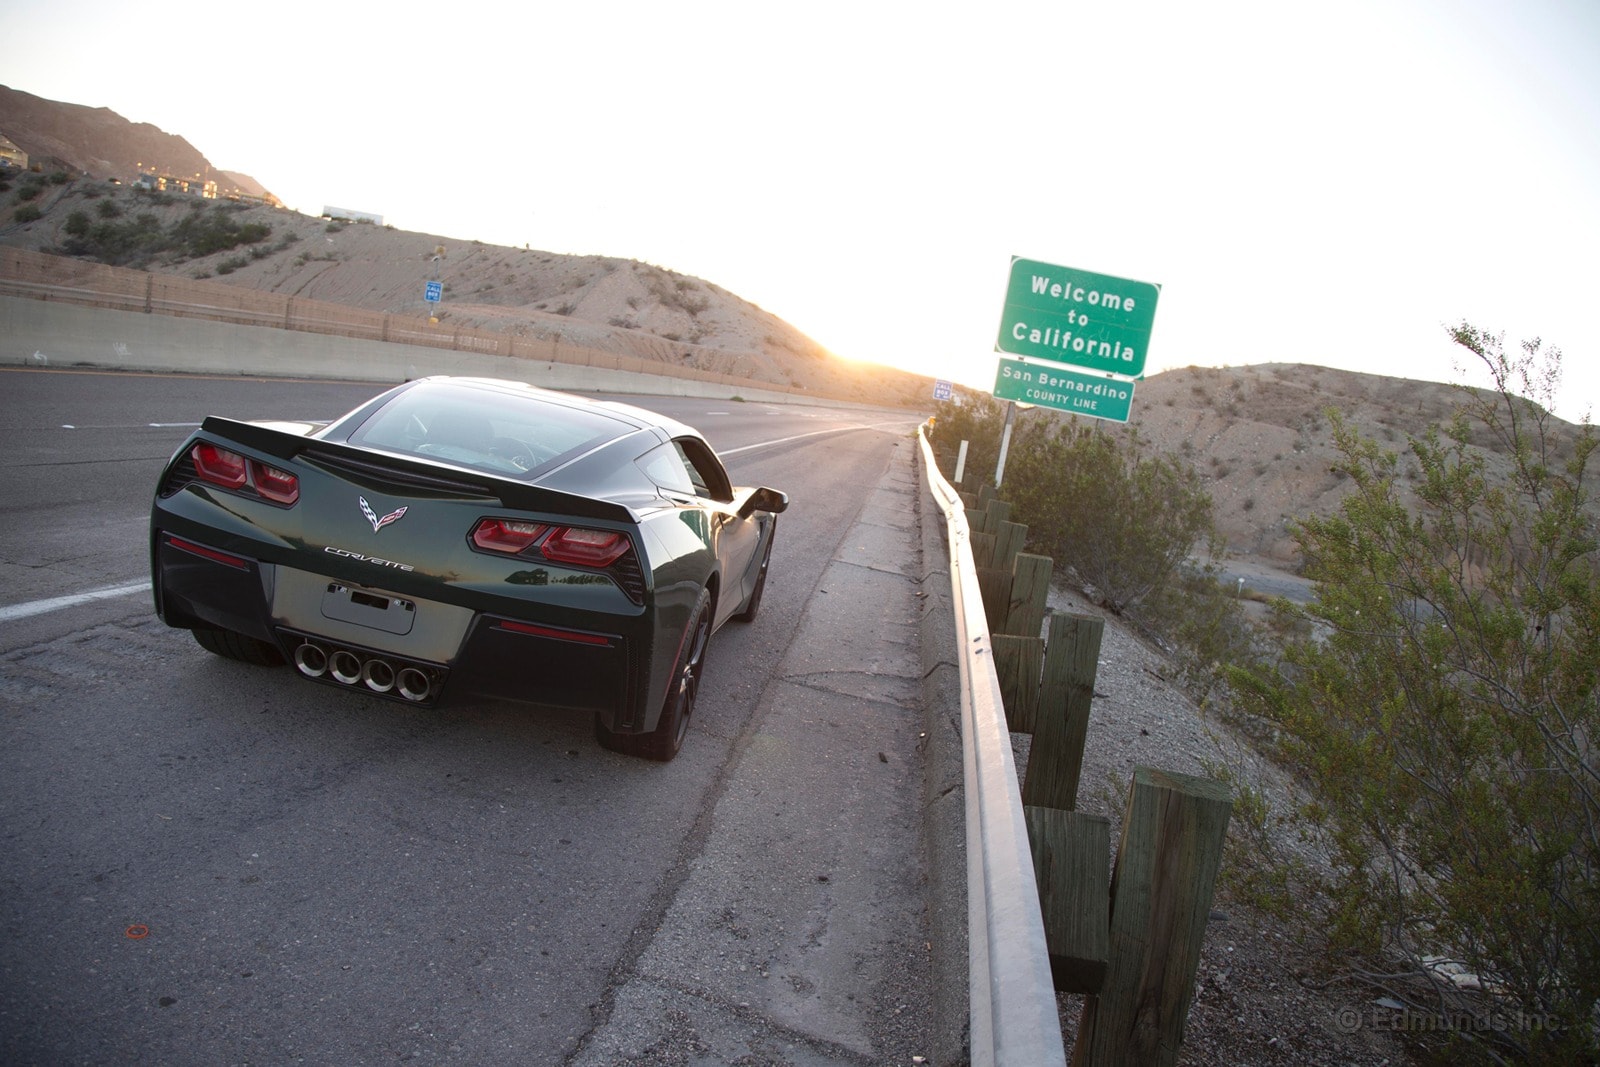 2014 Chevrolet Corvette Stingray: What's It Like to Live With 